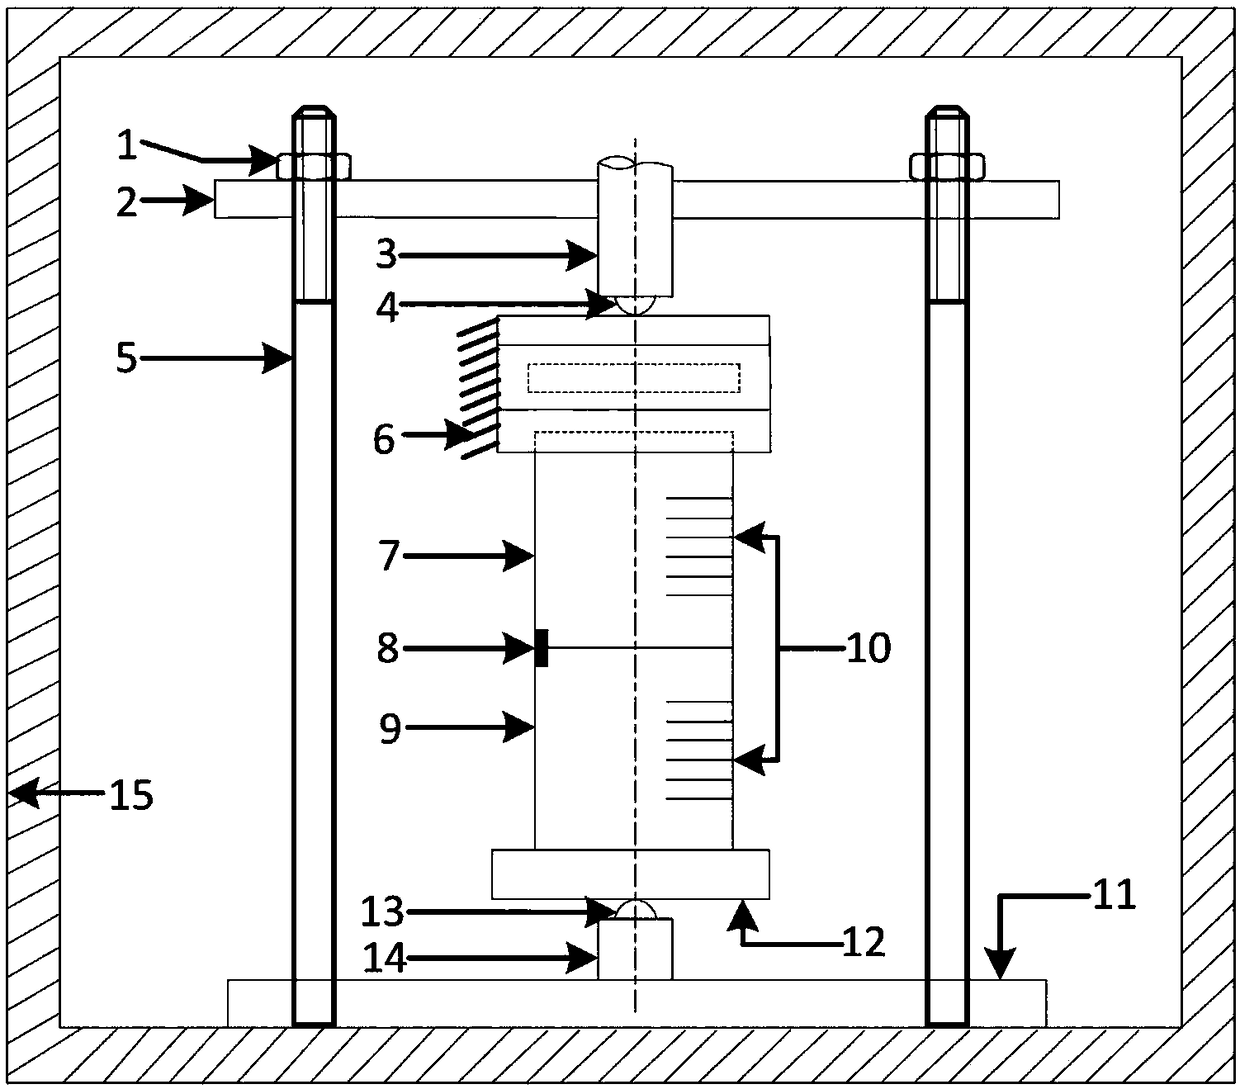 A device for measuring contact thermal conductance of a solid surface joint part